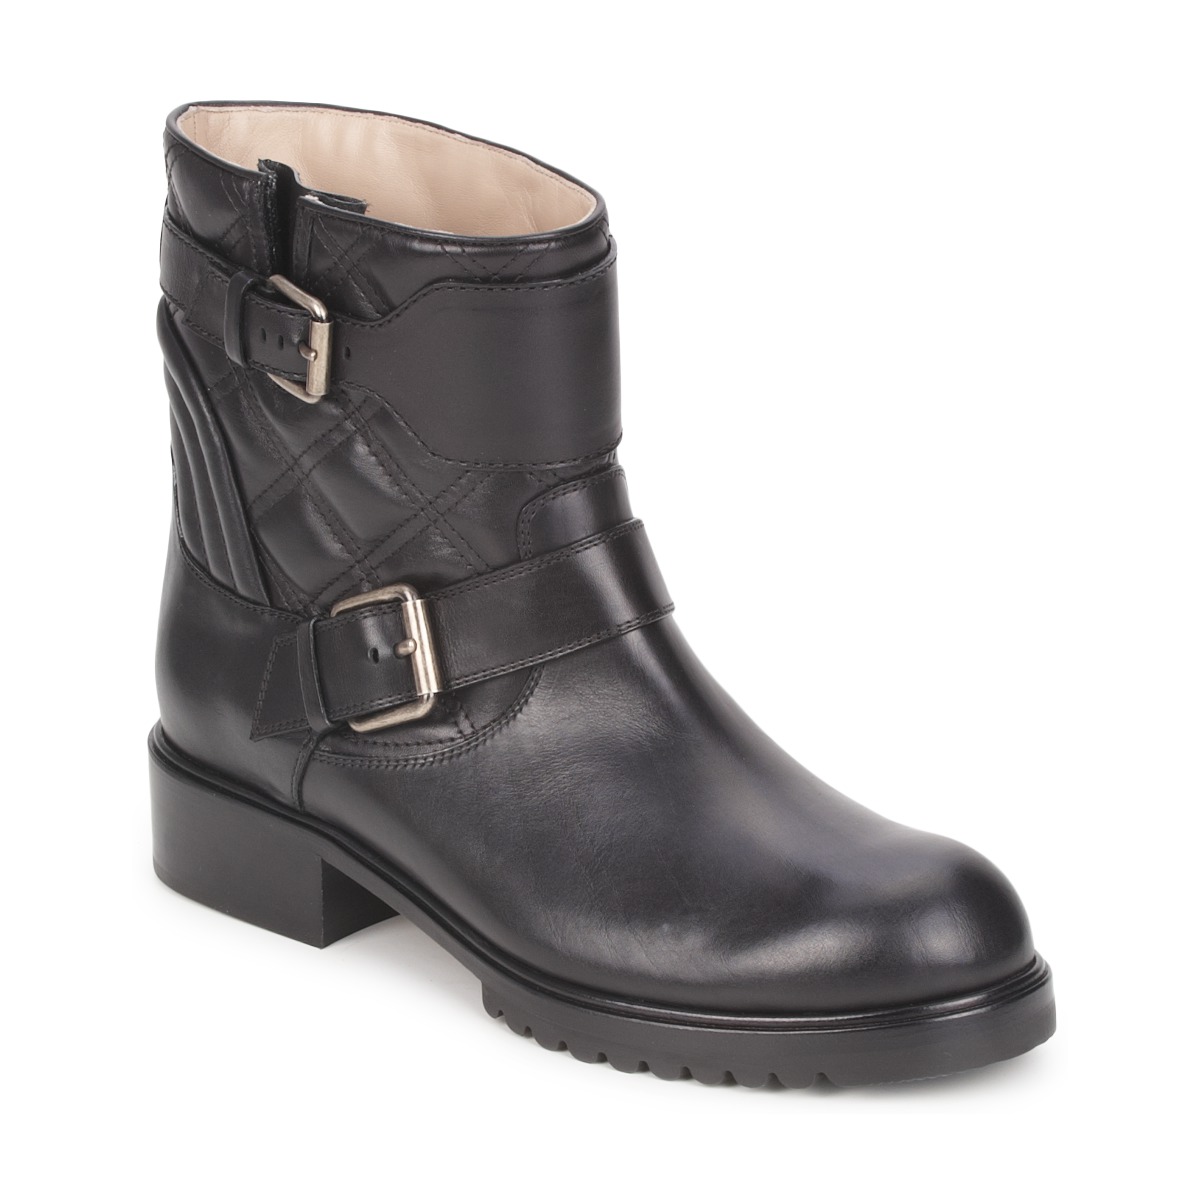 marc jacobs  oslo  women's mid boots in black